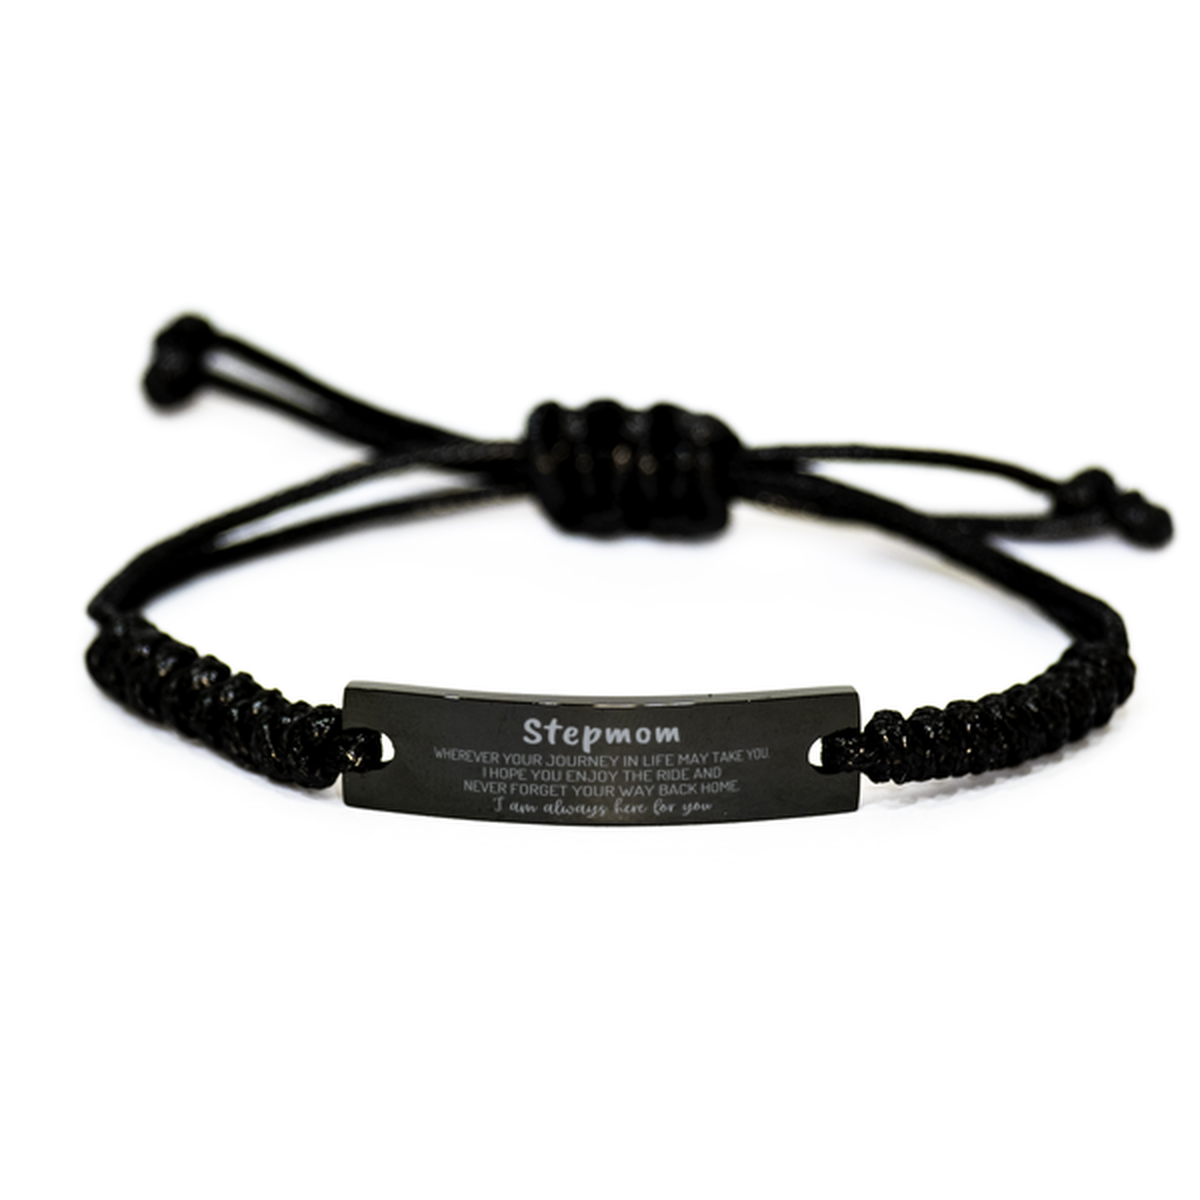 Stepmom wherever your journey in life may take you, I am always here for you Stepmom Black Rope Bracelet, Awesome Christmas Gifts For Stepmom, Stepmom Birthday Gifts for Men Women Family Loved One